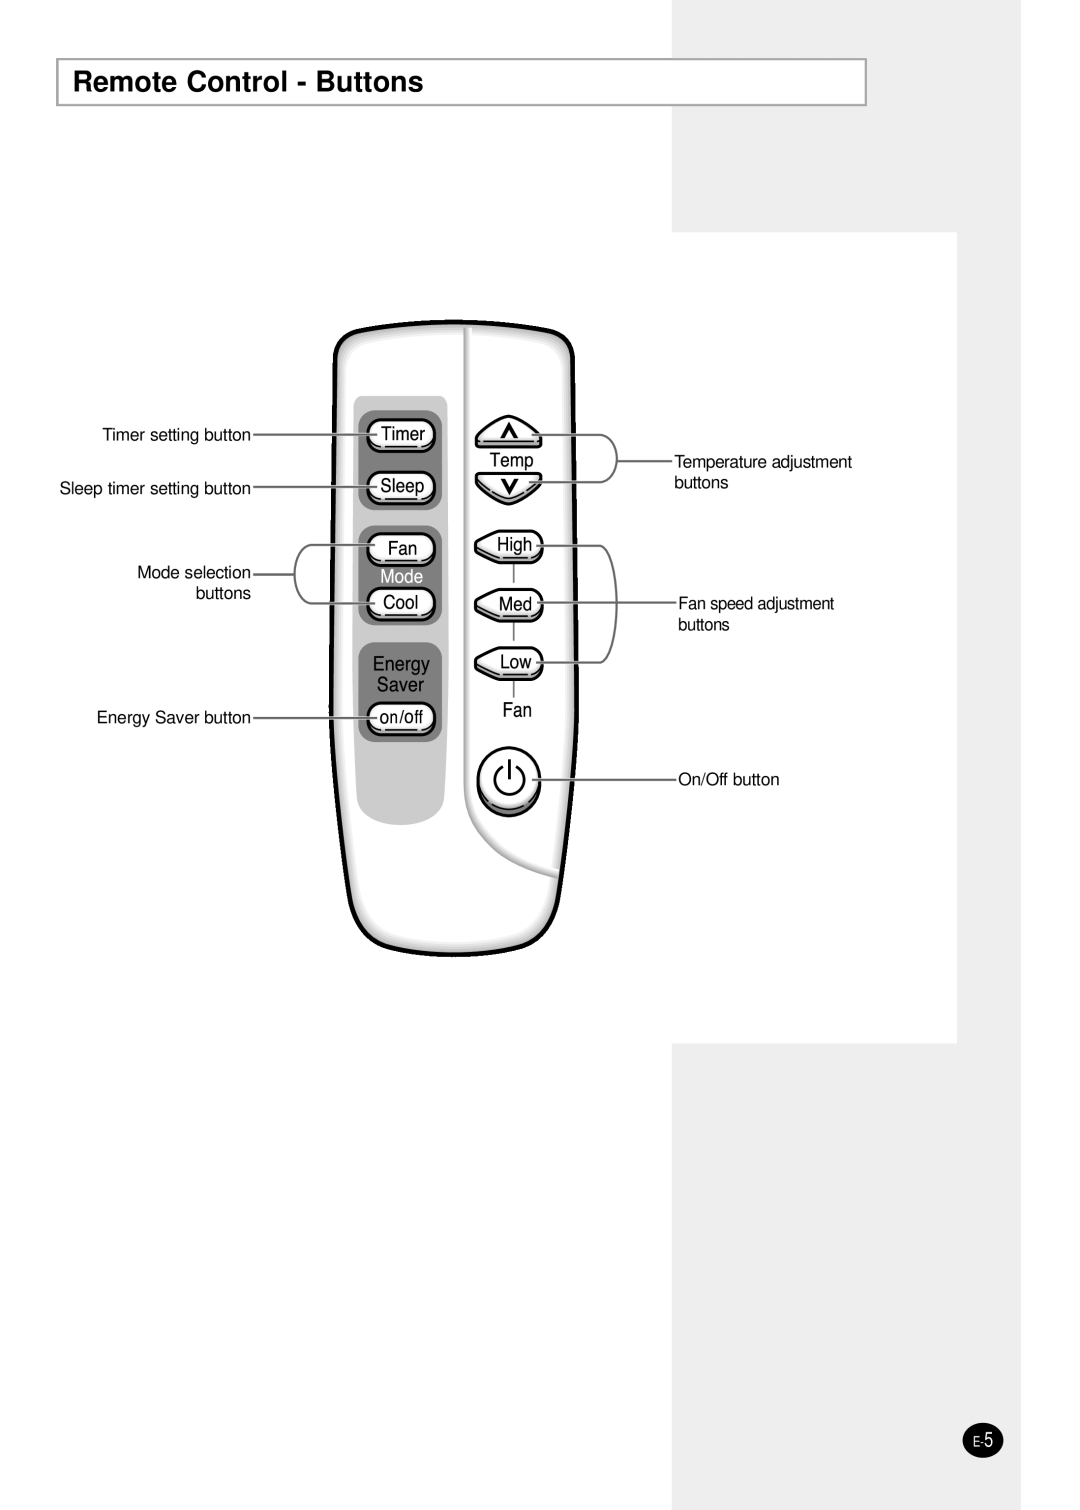 Samsung AW0601B Remote Control - Buttons, Timer setting button Sleep timer setting button, Temperature adjustment buttons 